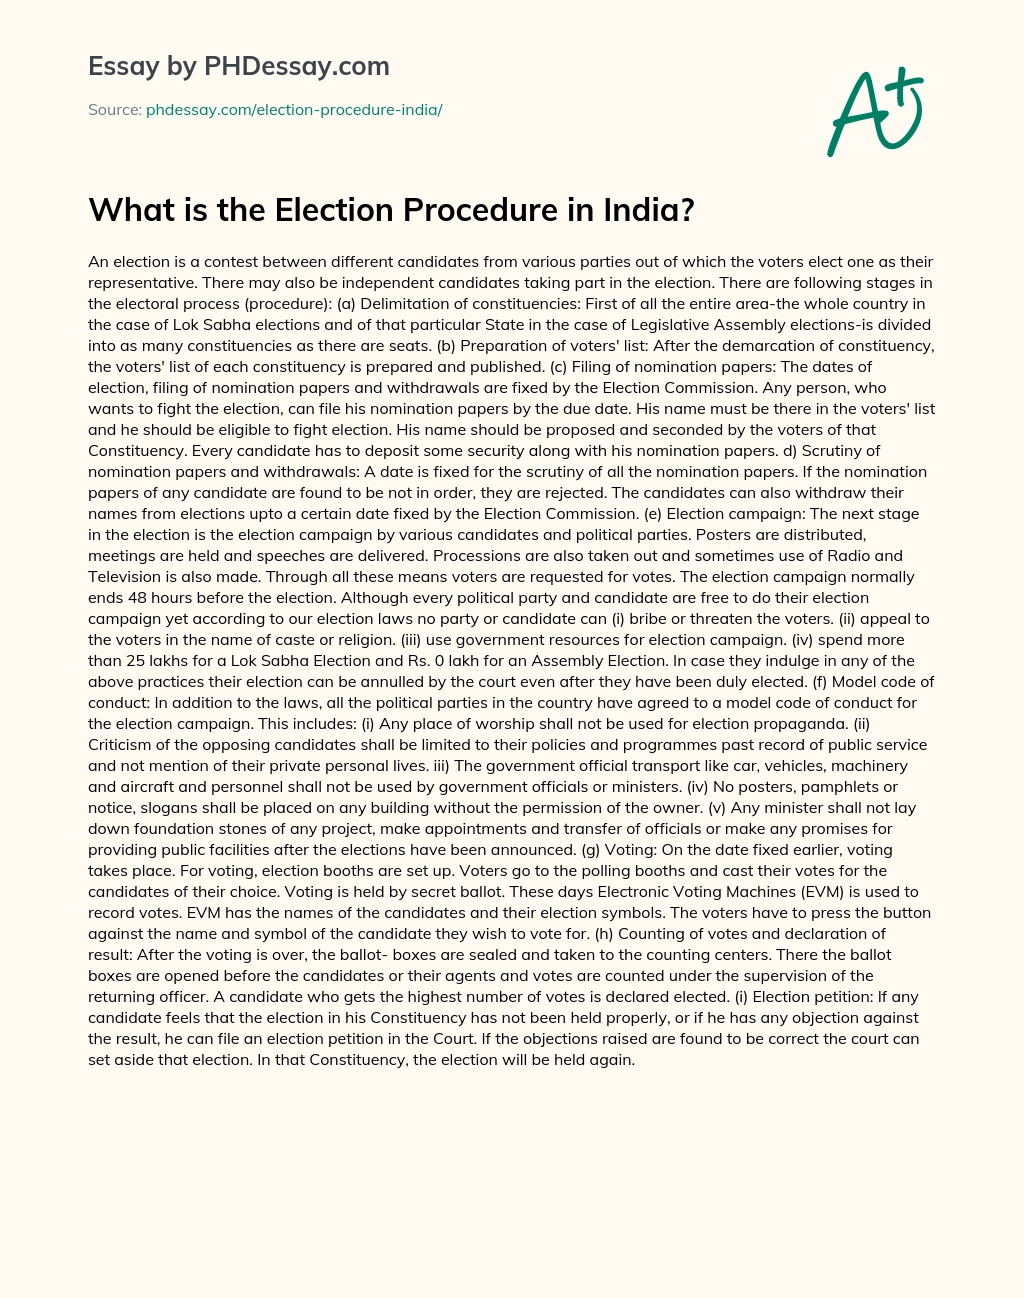 What is the Election Procedure in India? essay